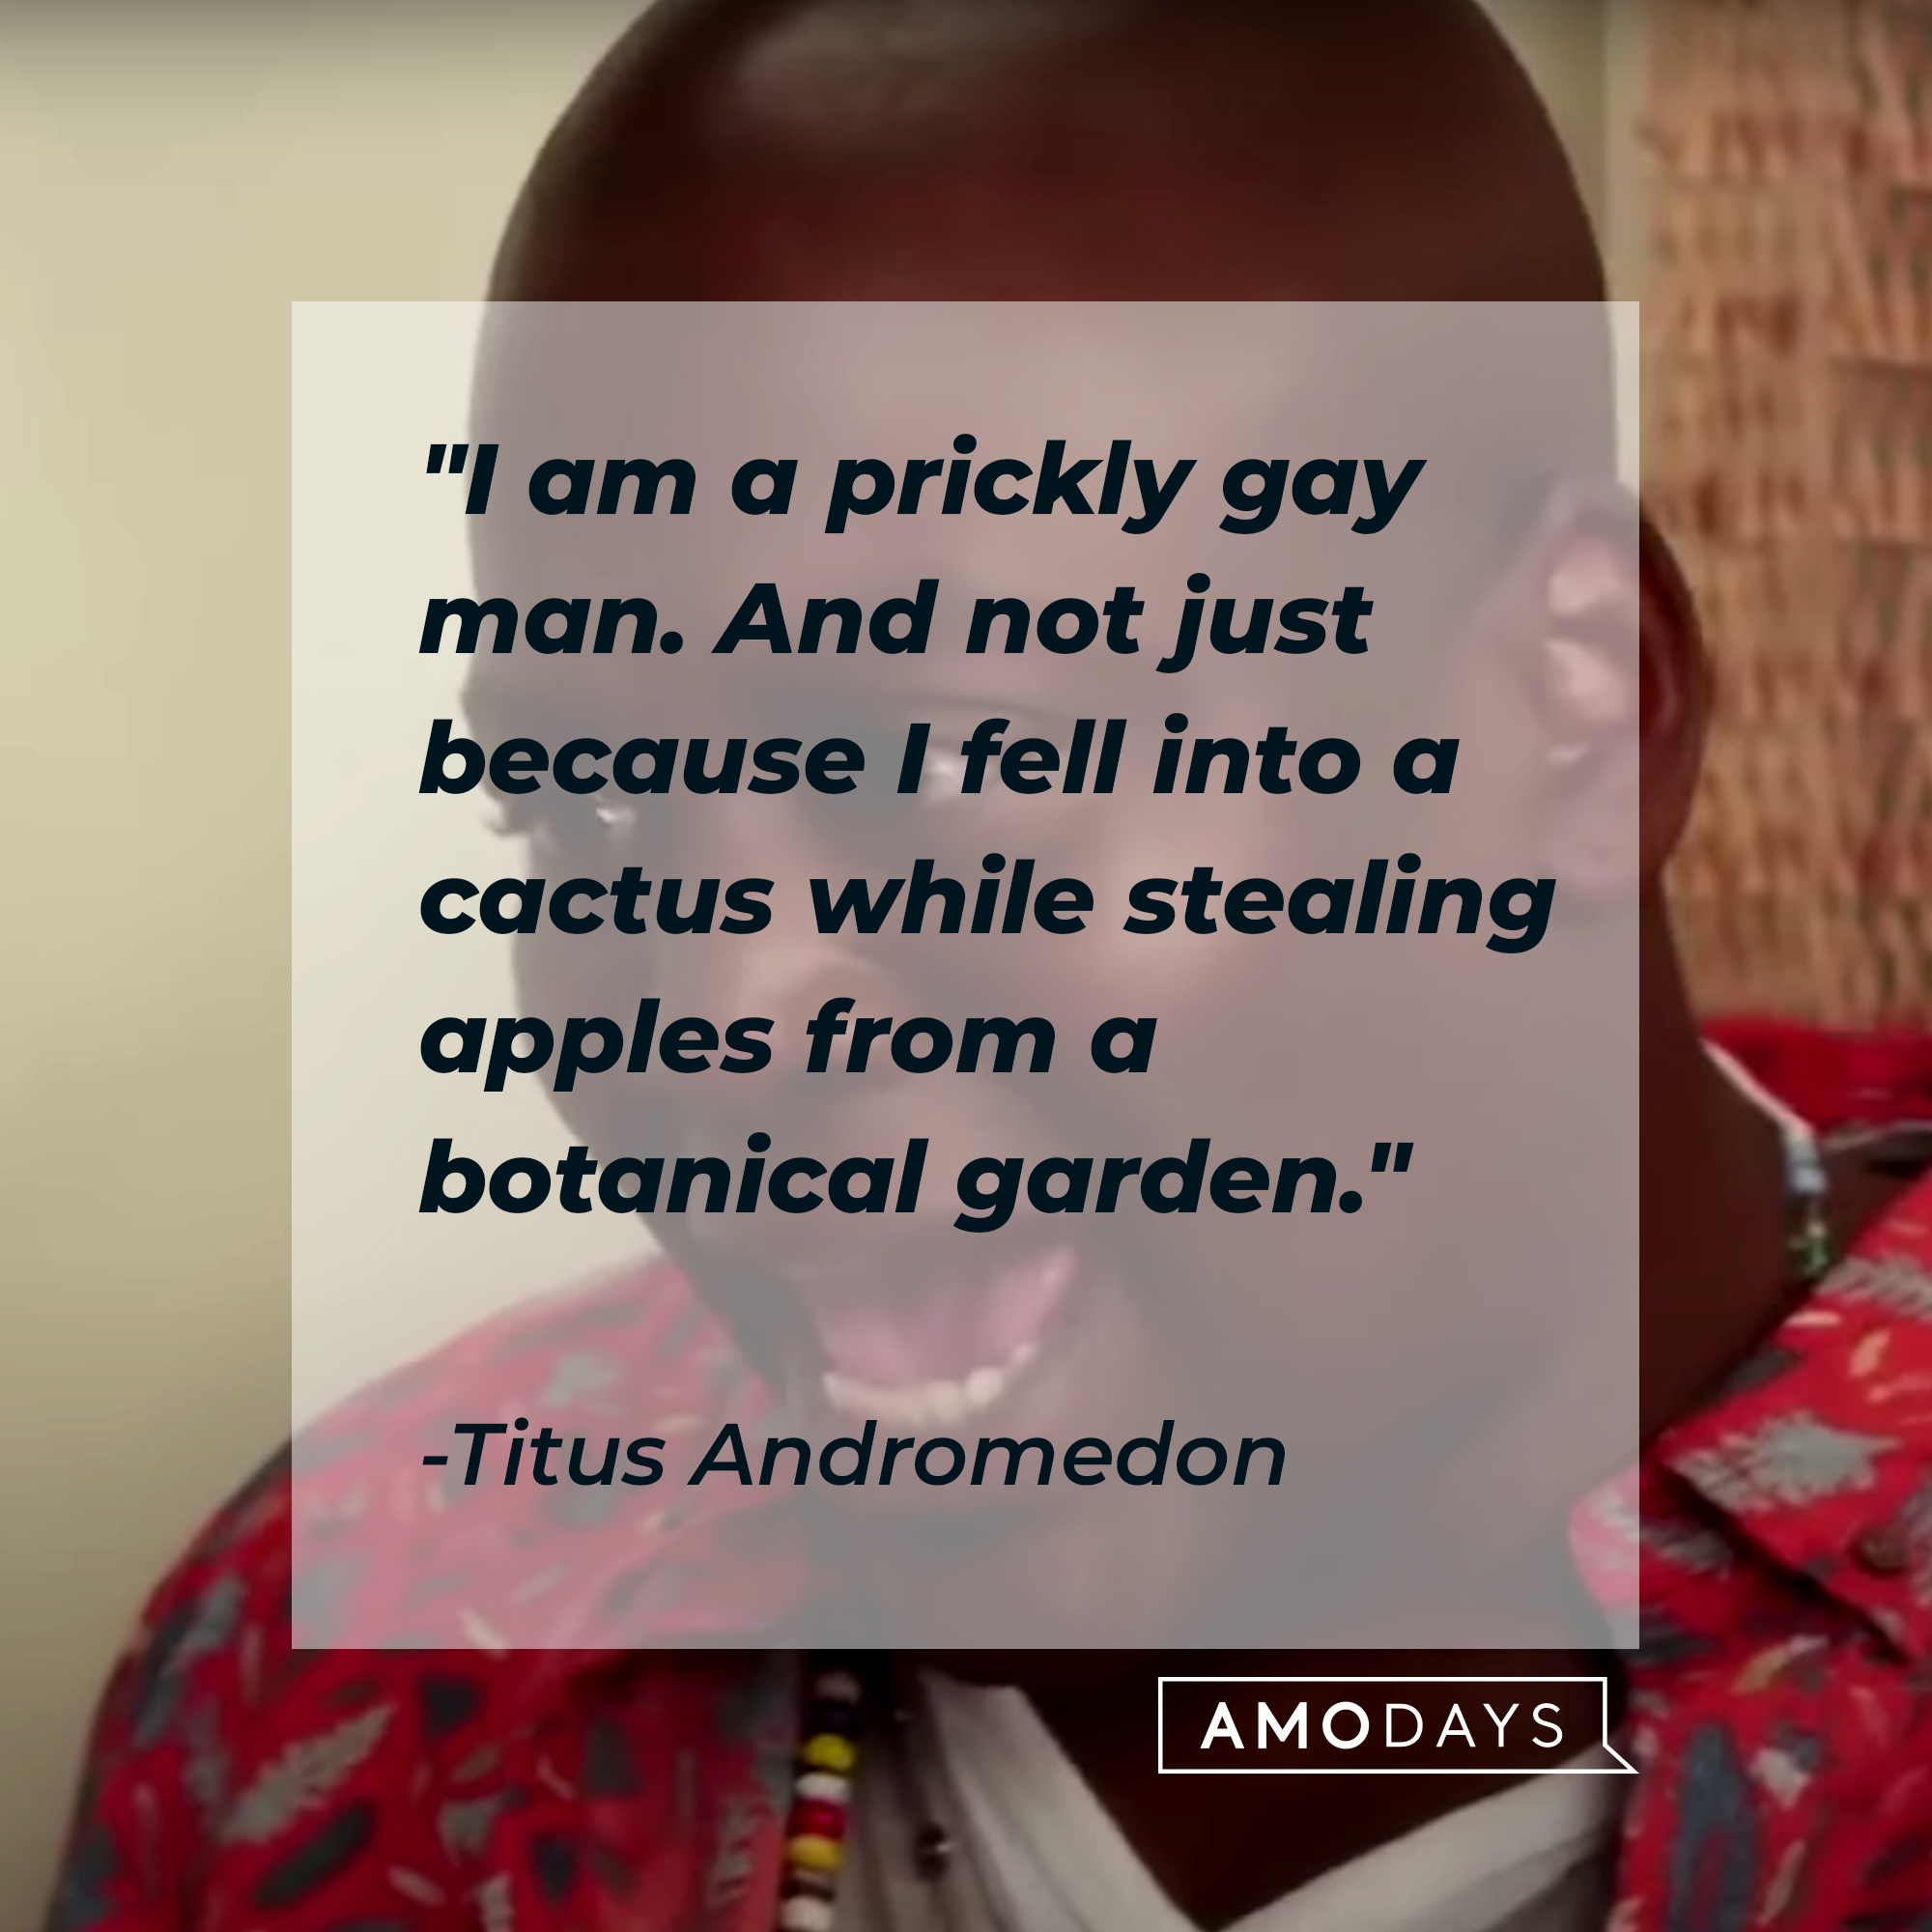 A photo of Titus Andromedon with the quote, "I am a prickly gay man. And not just because I fell into a cactus while stealing apples from a botanical garden."  | Source: YouTube/Netflix